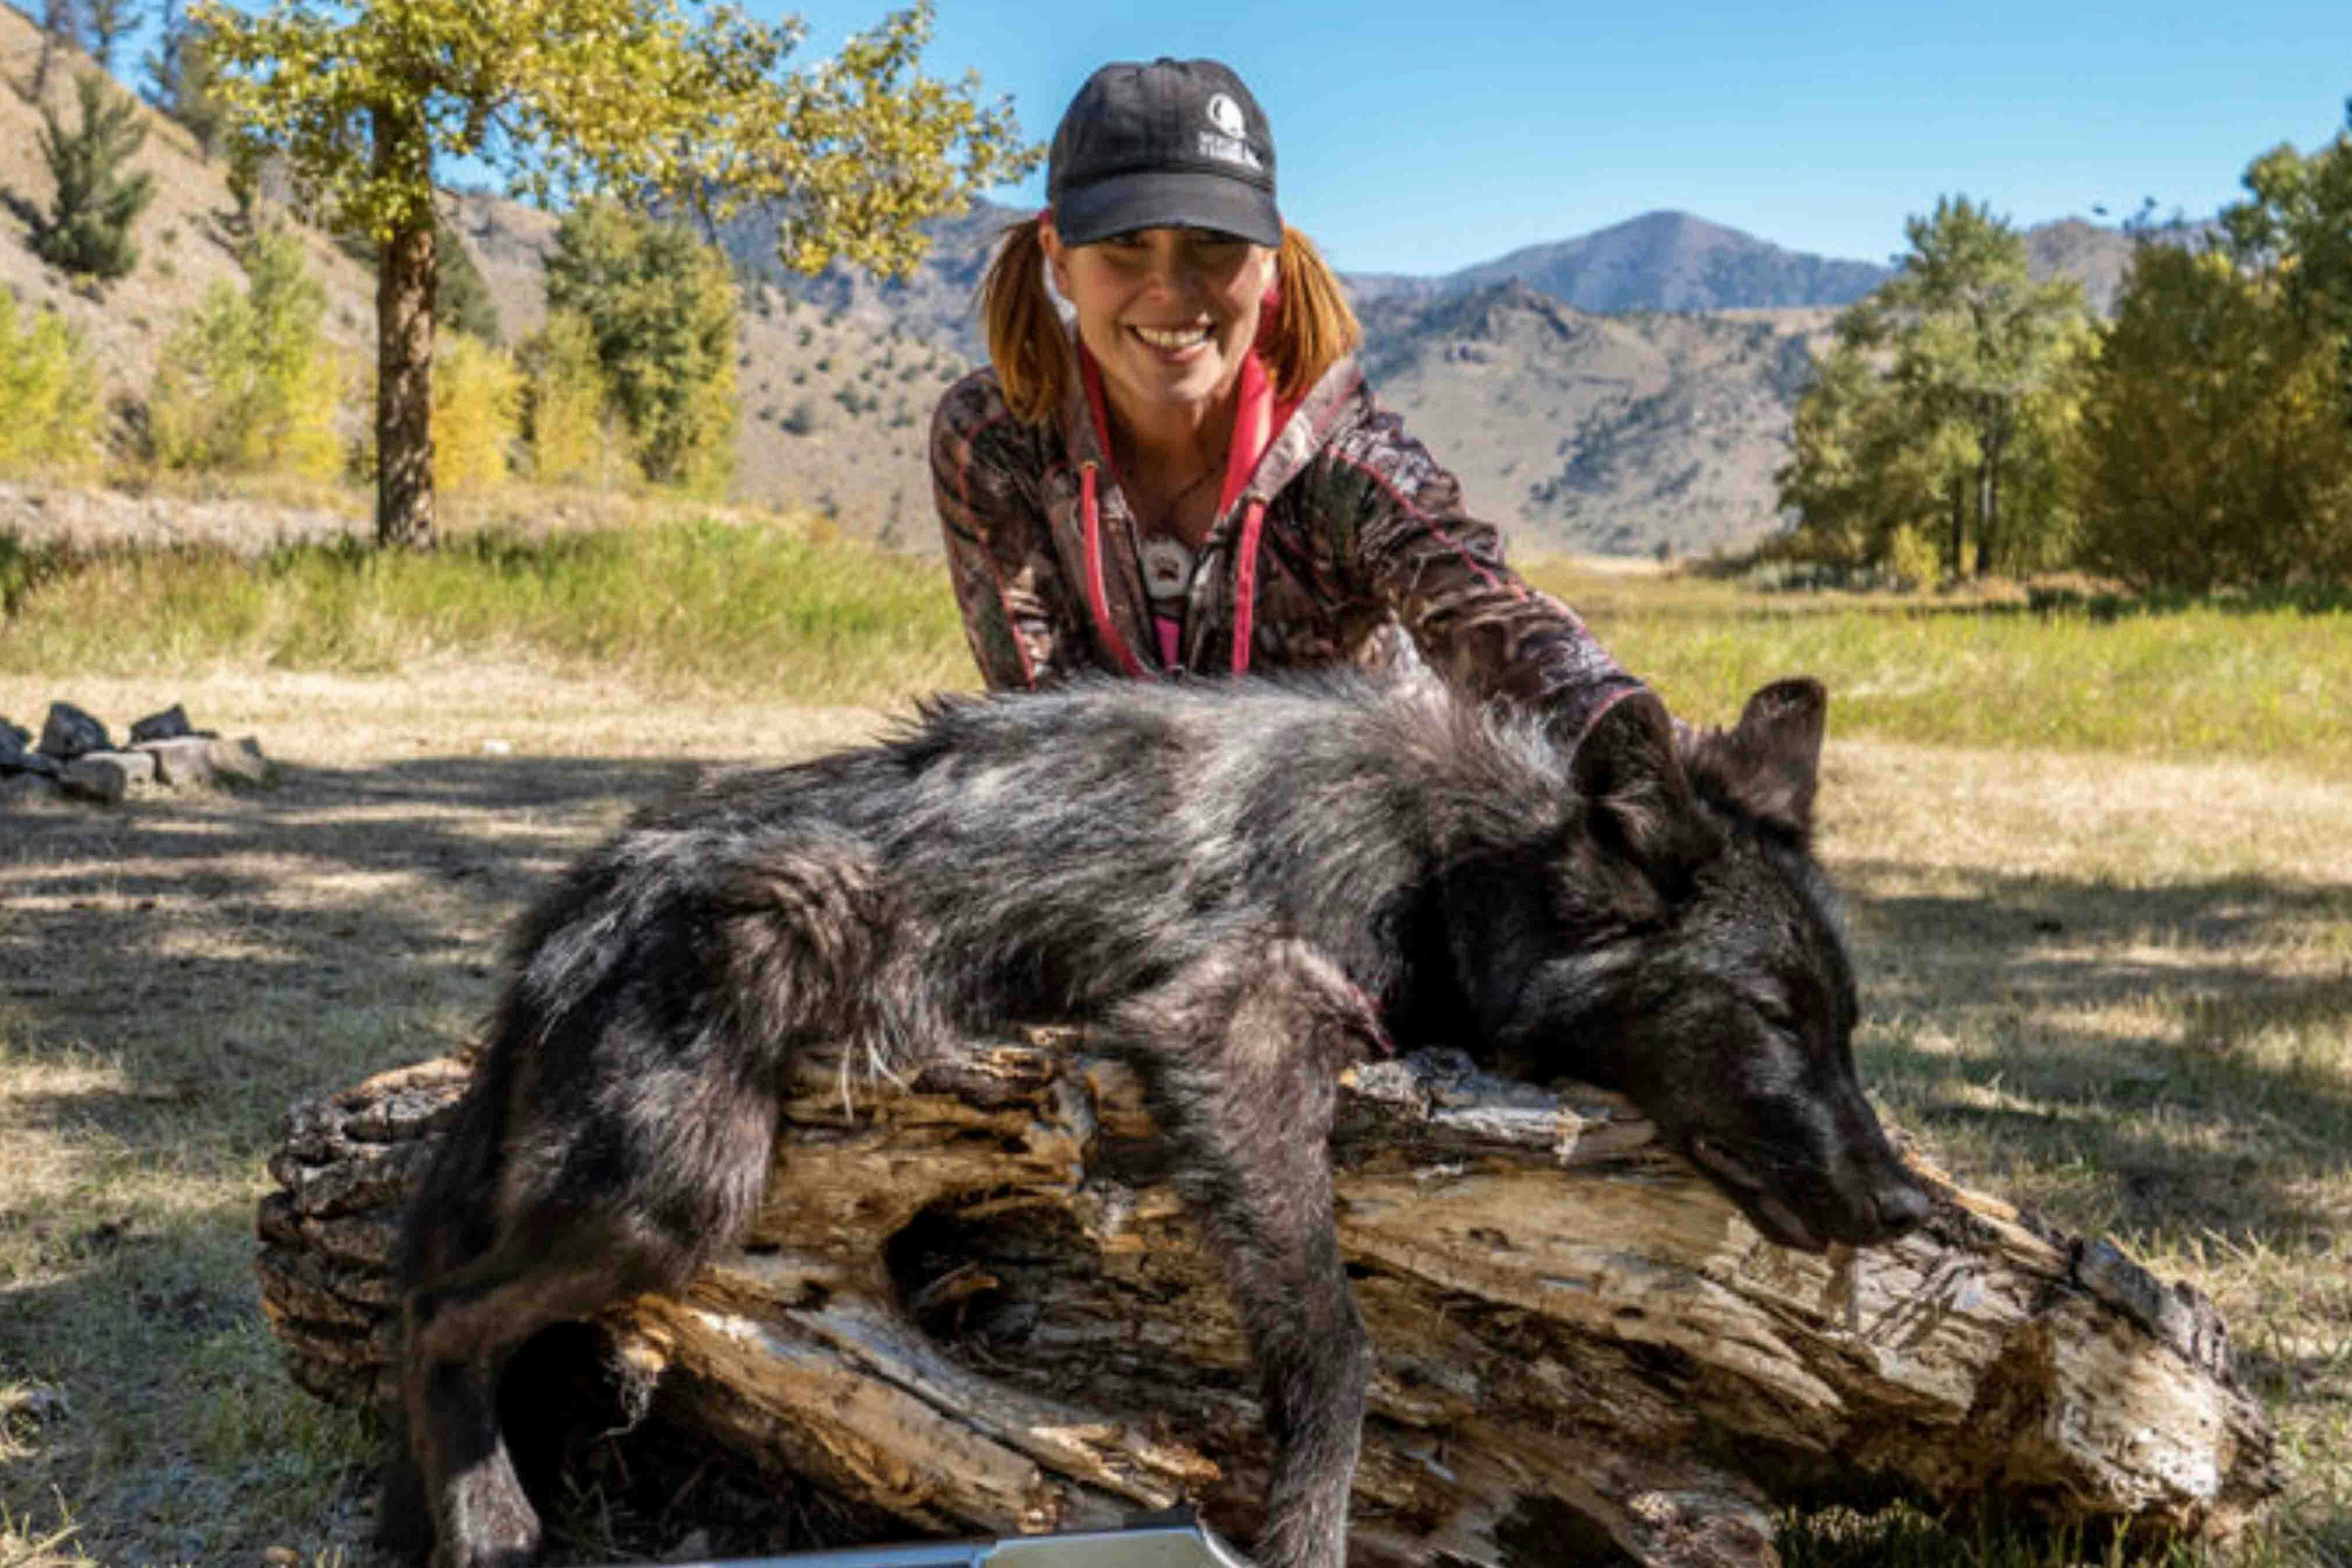 After years of hunting elusive Wyoming wolves, Tessa Fowler of Cody bagged this one in 2018.